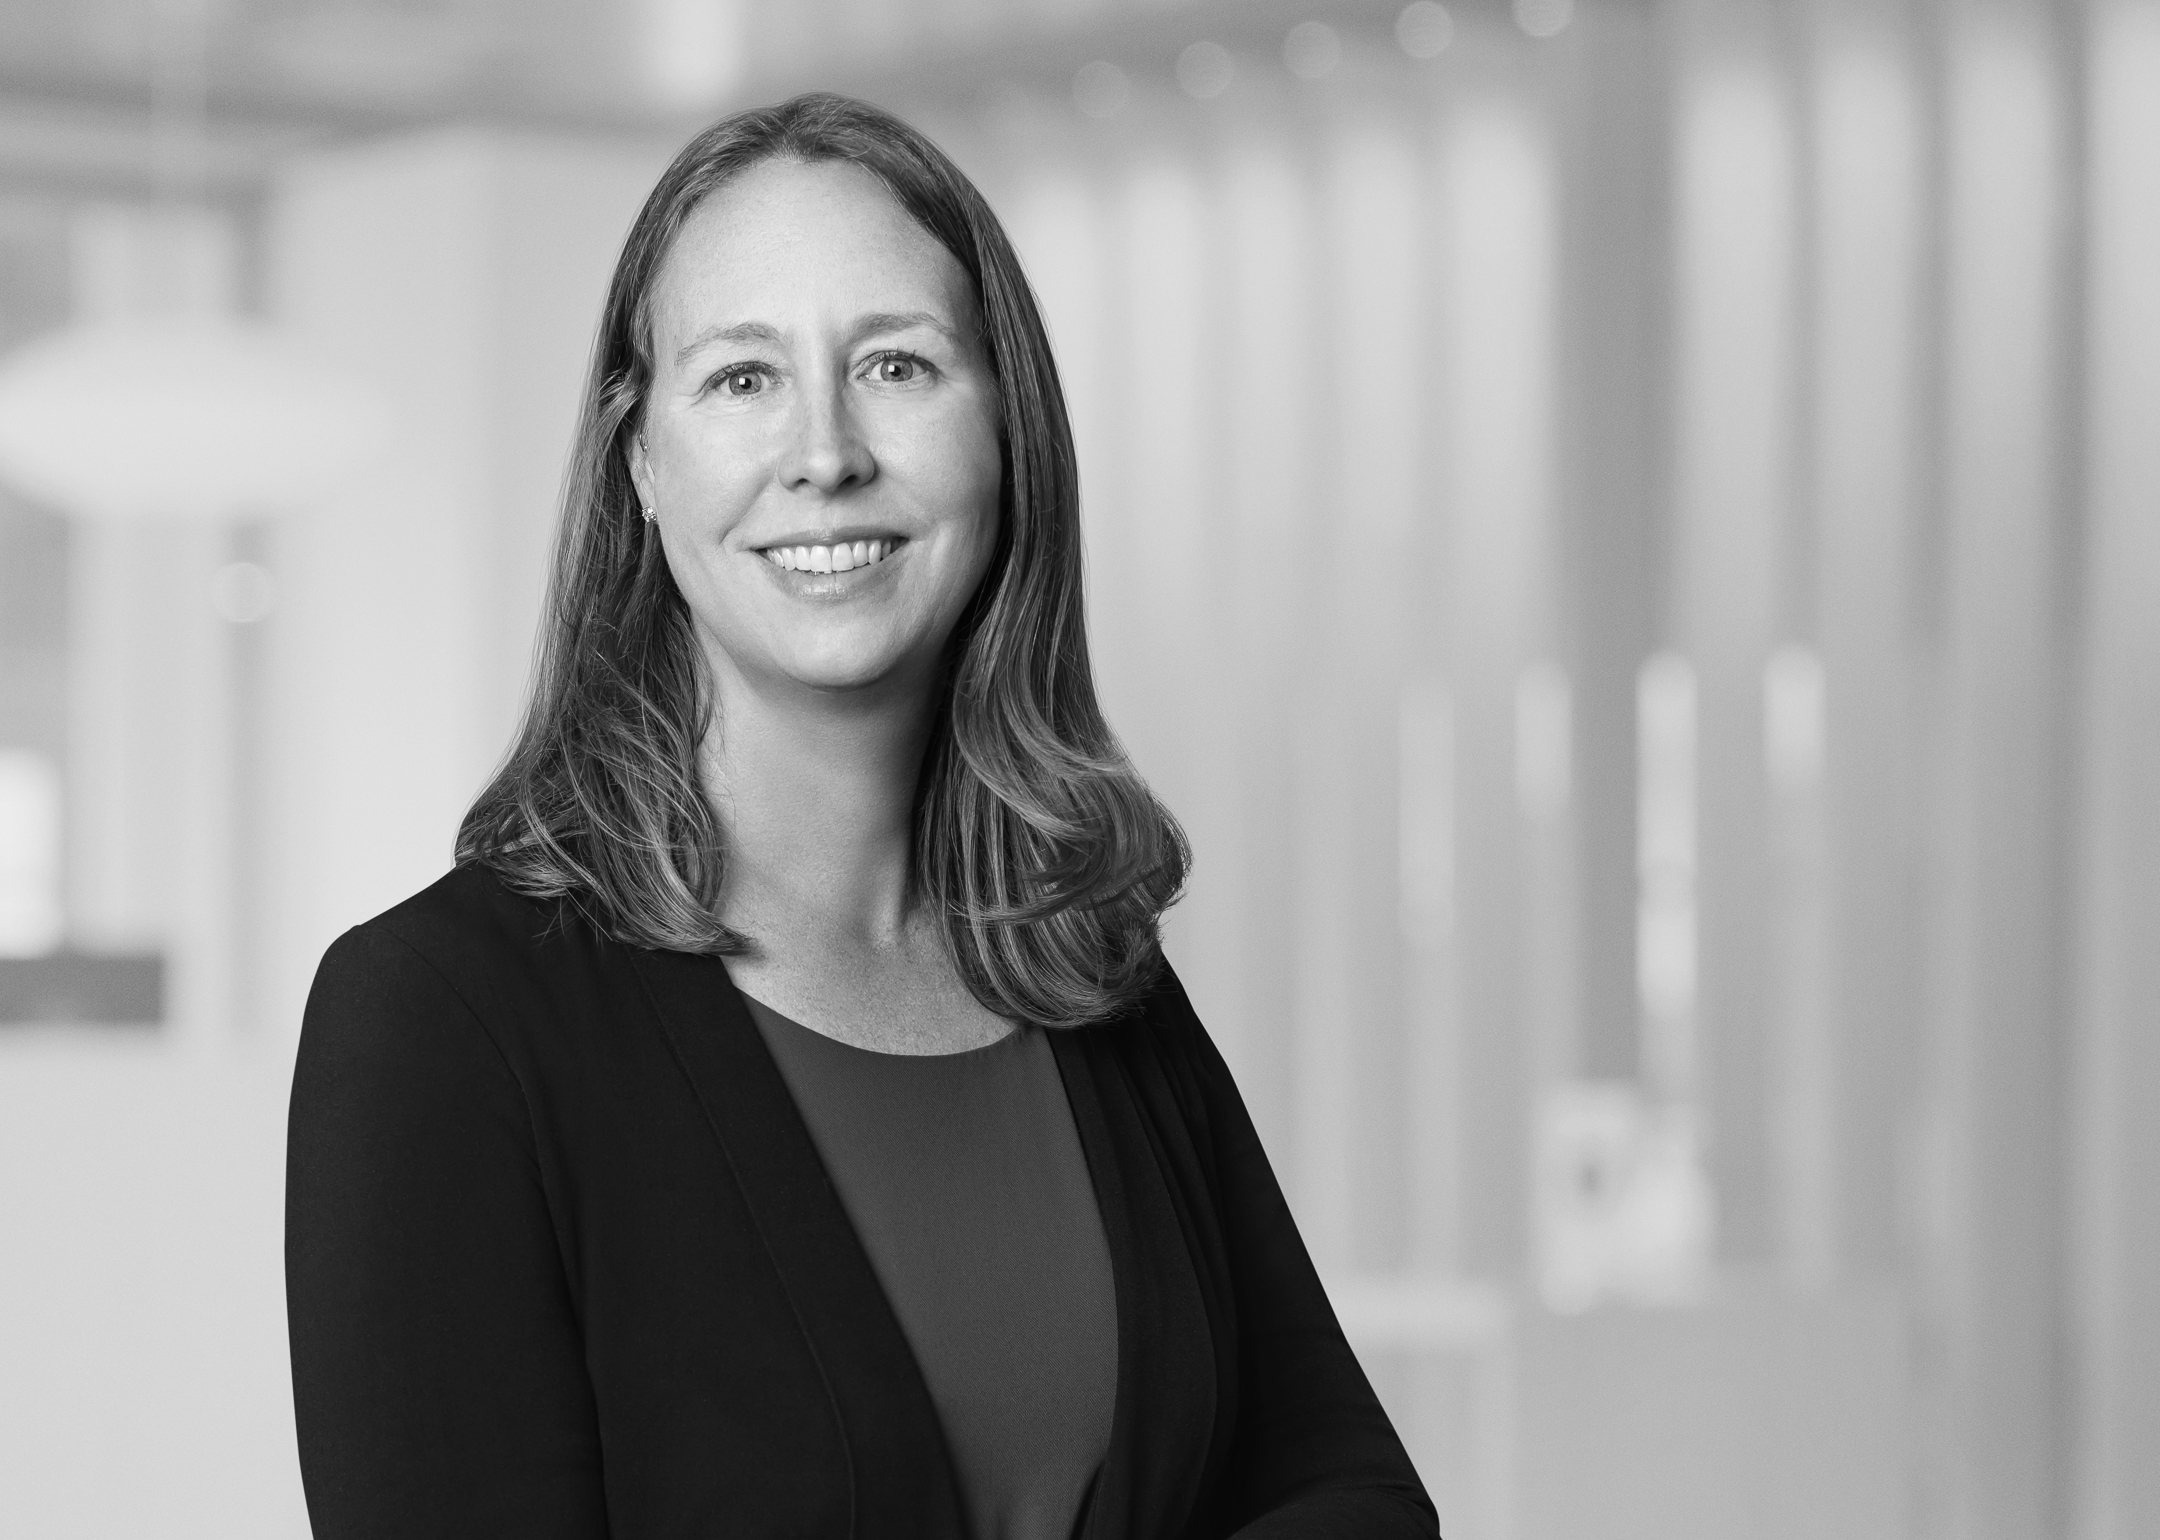 Joanna F. Newdeck, Senior Counsel, Financial Restructuring